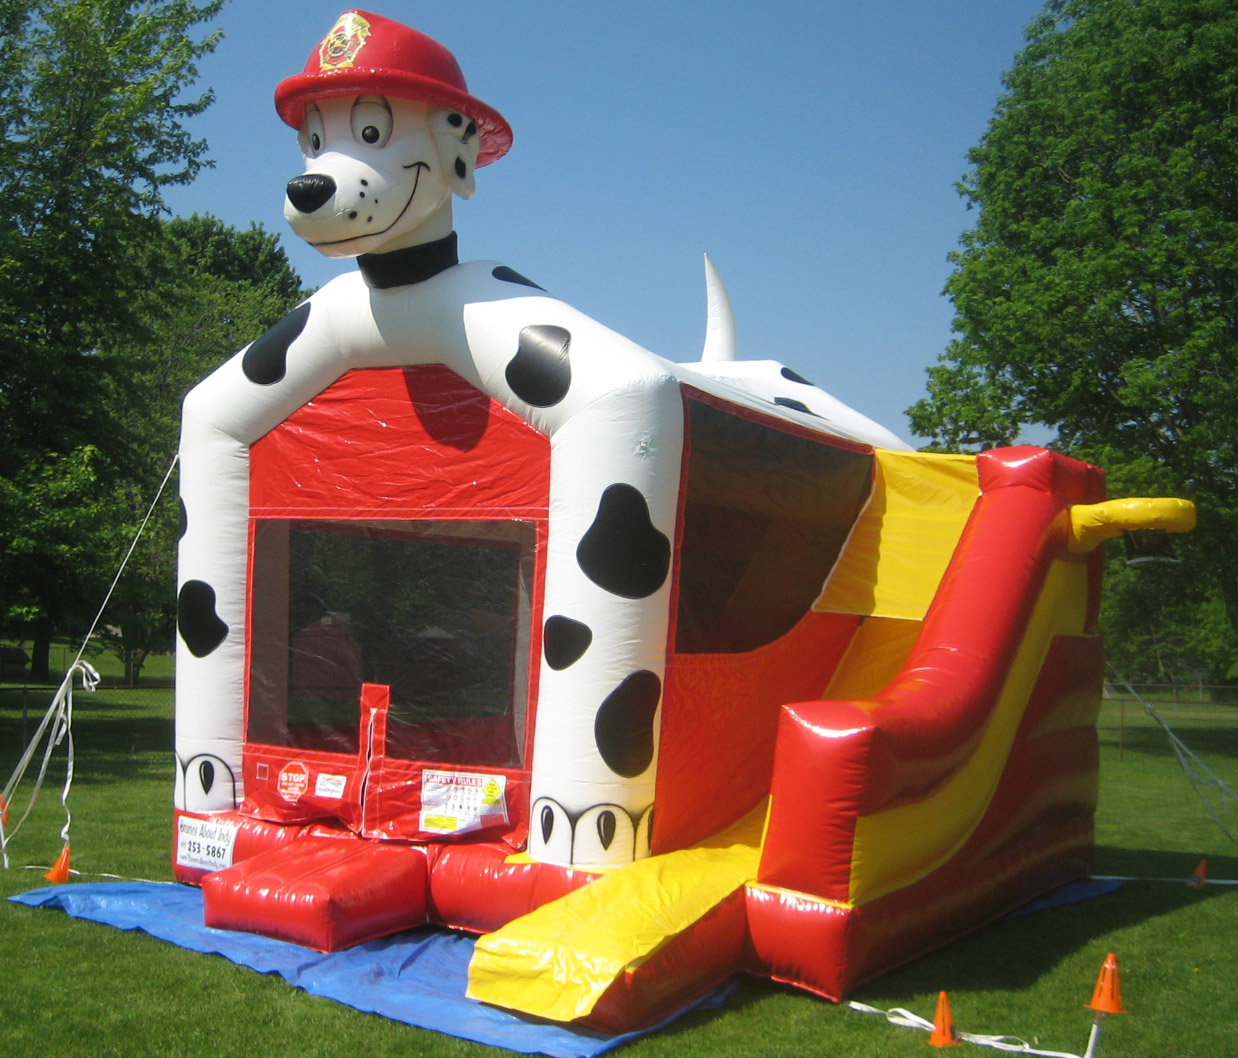 Rent the Paw Patrol themed combo bounce house for your next event or birthday party from Carolina Fun Factory